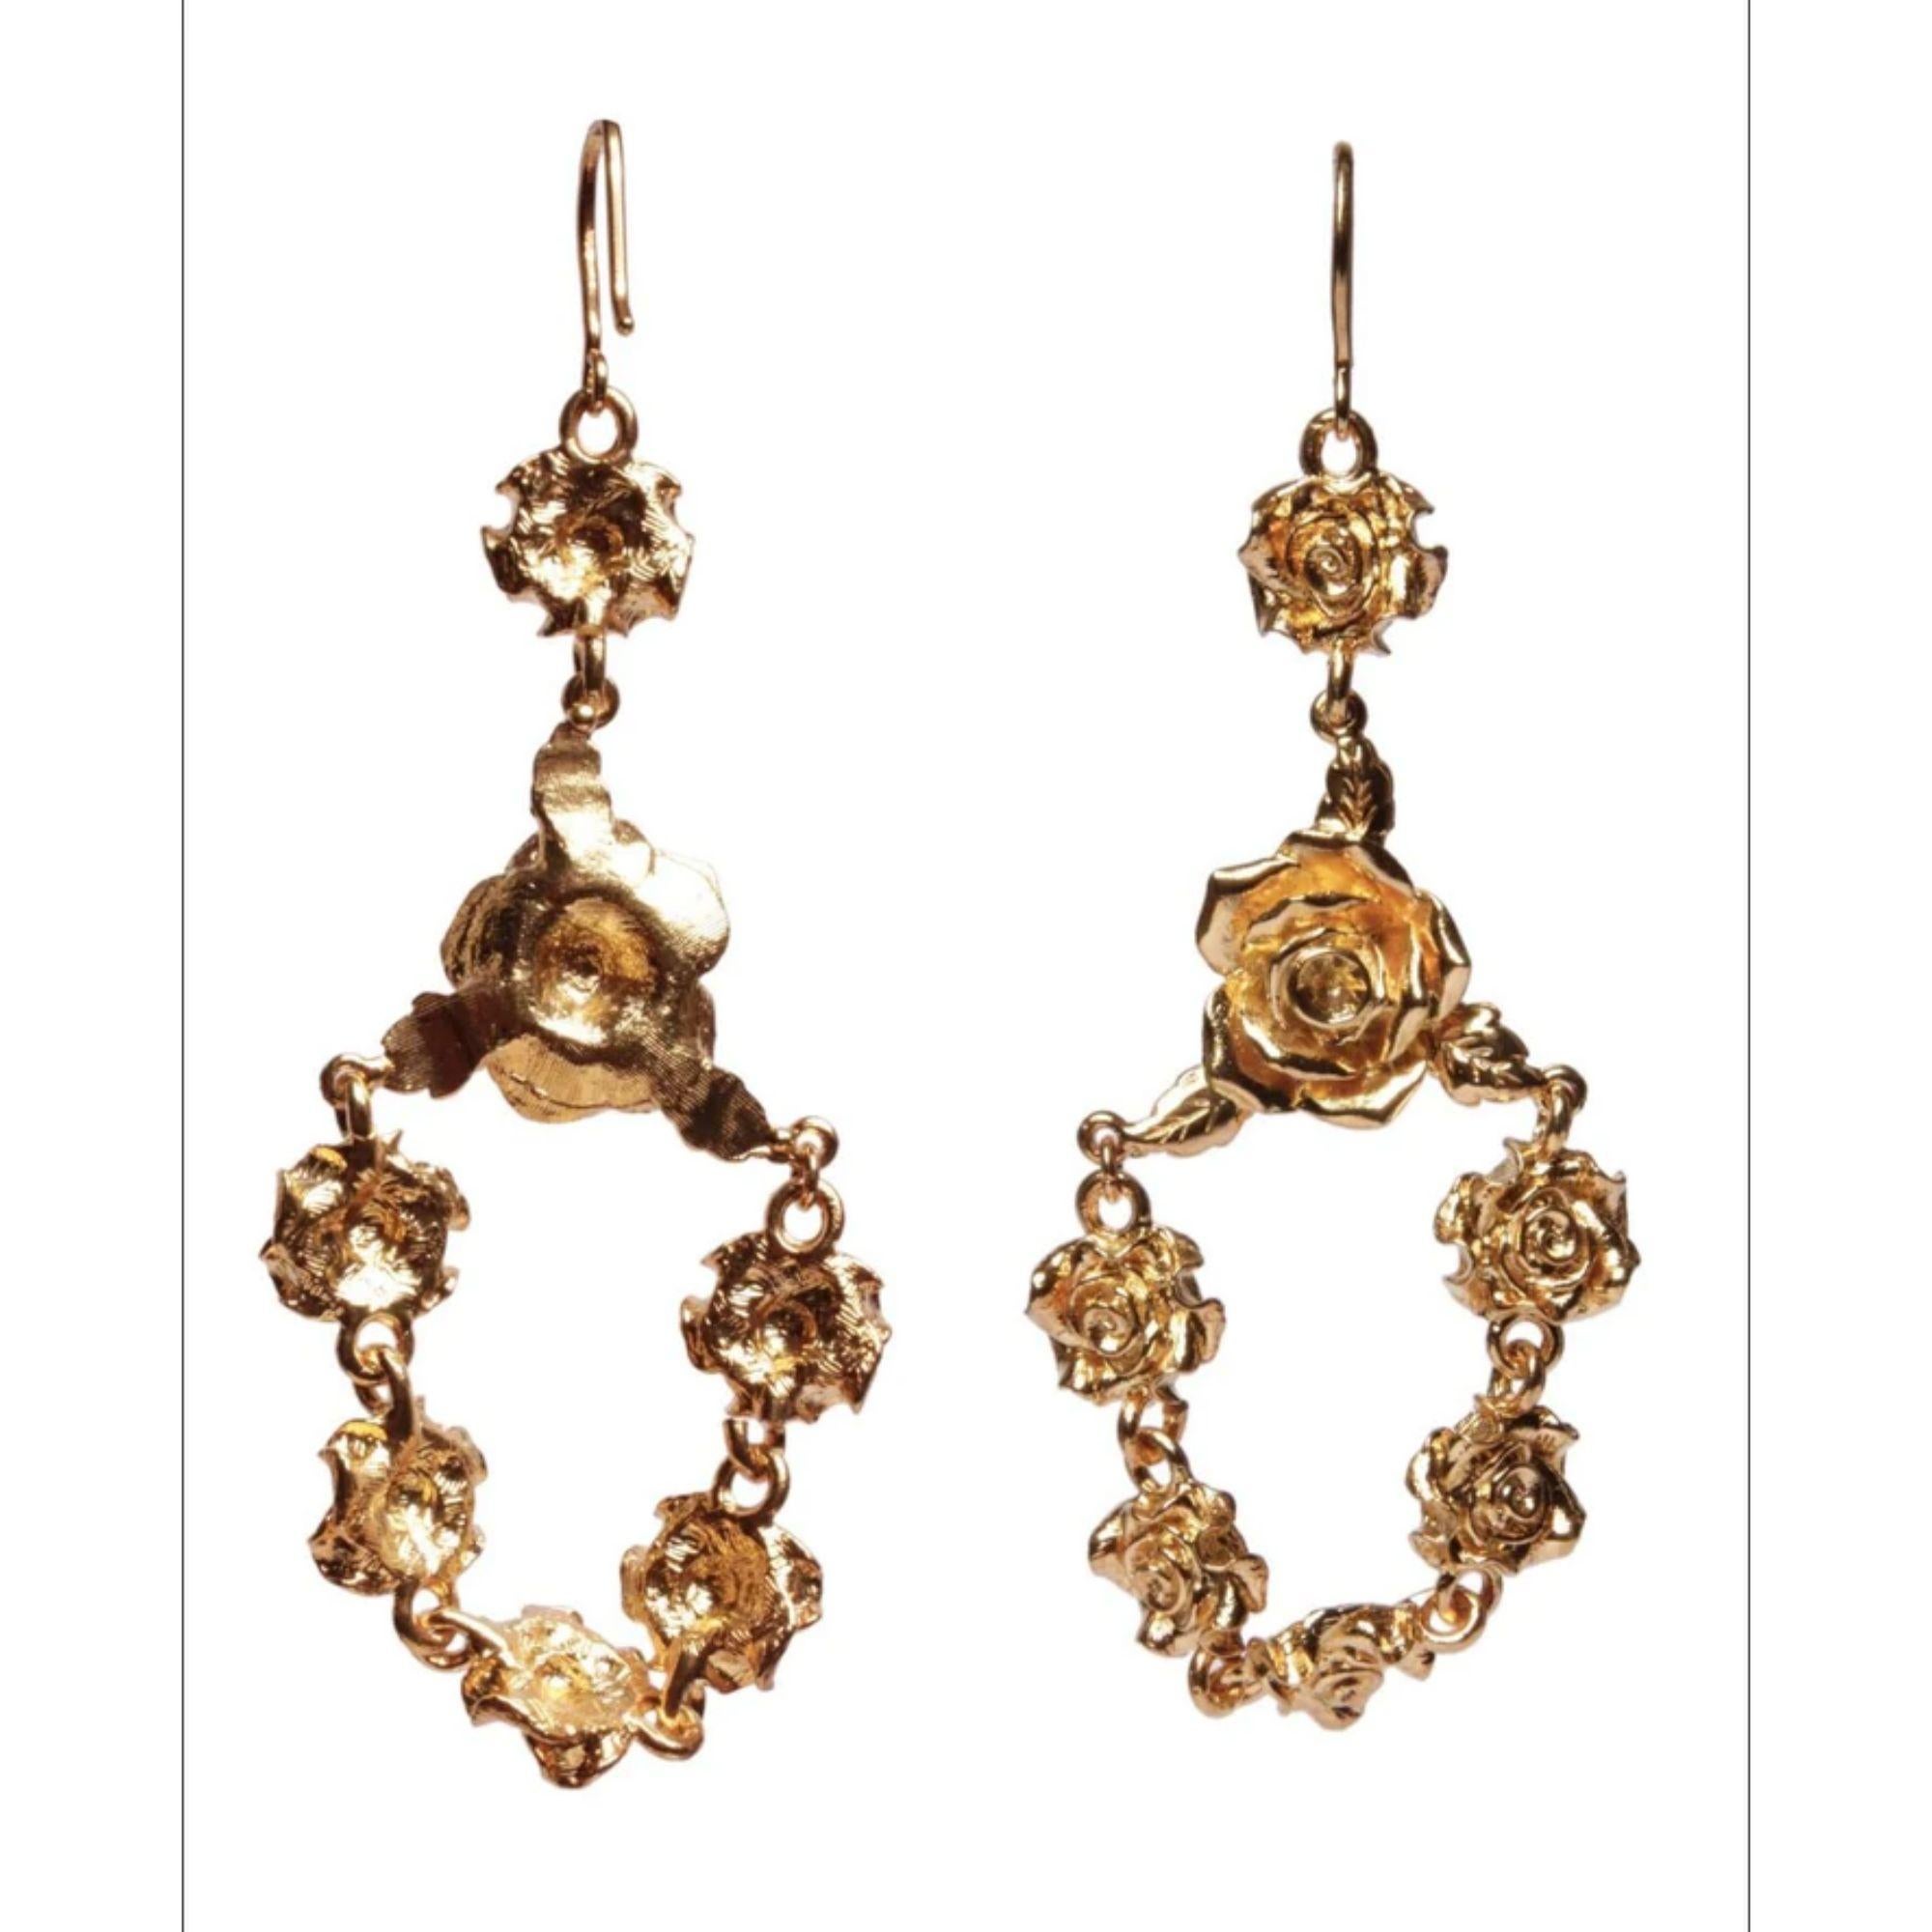 Frame your face in a delicate bouquet of rosettes! These drop chandelier earrings will add romantic glamour to any look. Match with the rosette necklace, bracelet and harness. Made in America. Plated on Brass.

Additional Information:
Material: 24K